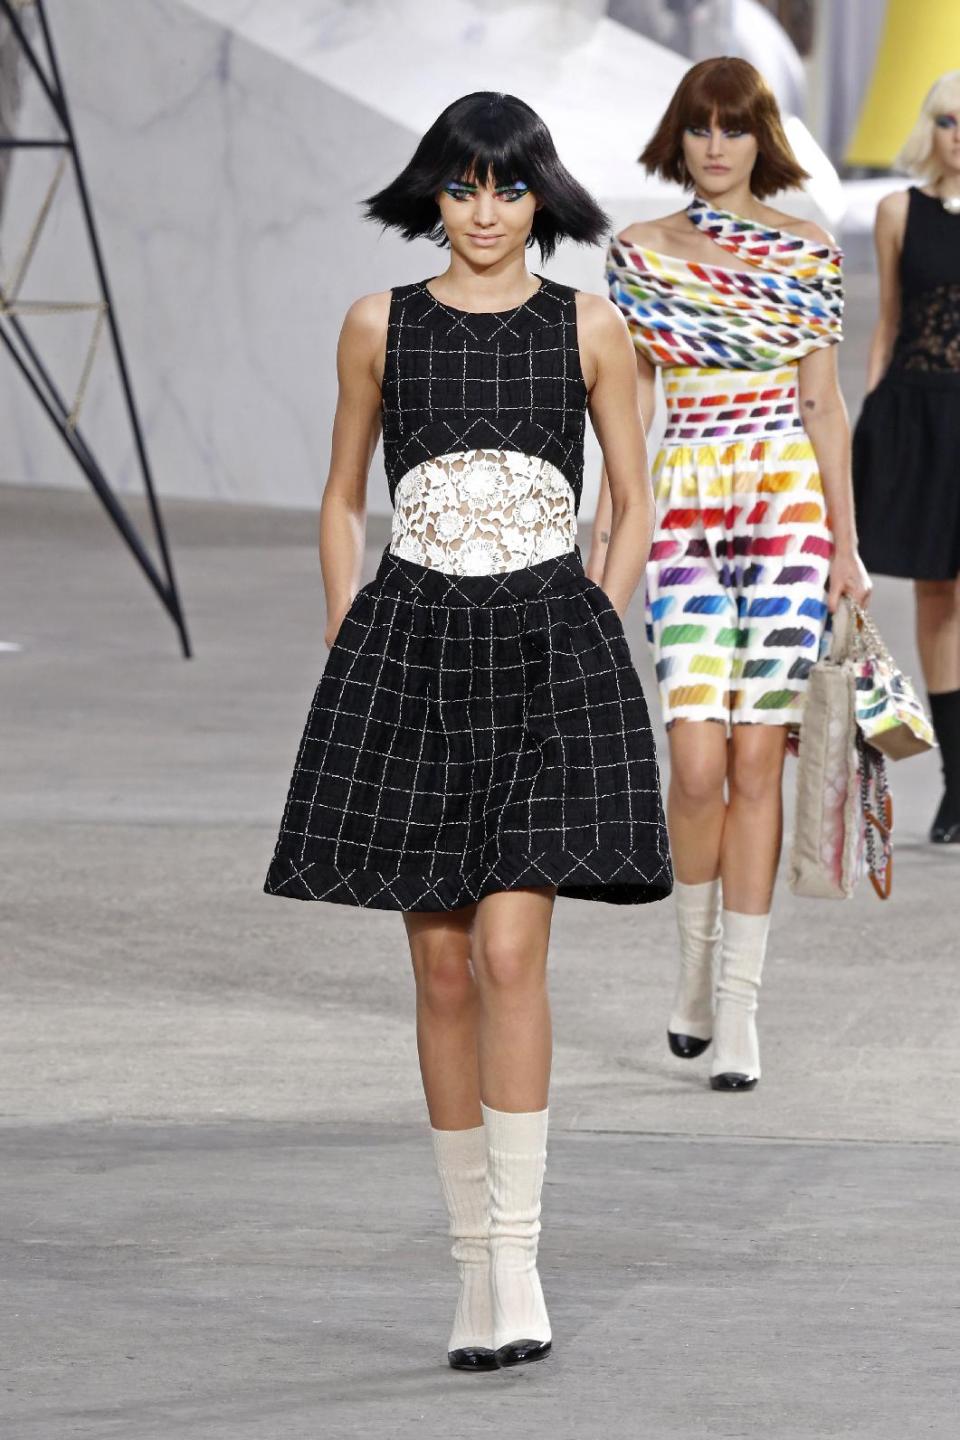 Model Miranda Kerr, foreground, presents a creation as part of Chanel's ready-to-wear Spring/Summer 2014 fashion collection, presented Tuesday, Oct. 1, 2013 in Paris. (AP Photo/Jacques Brinon)